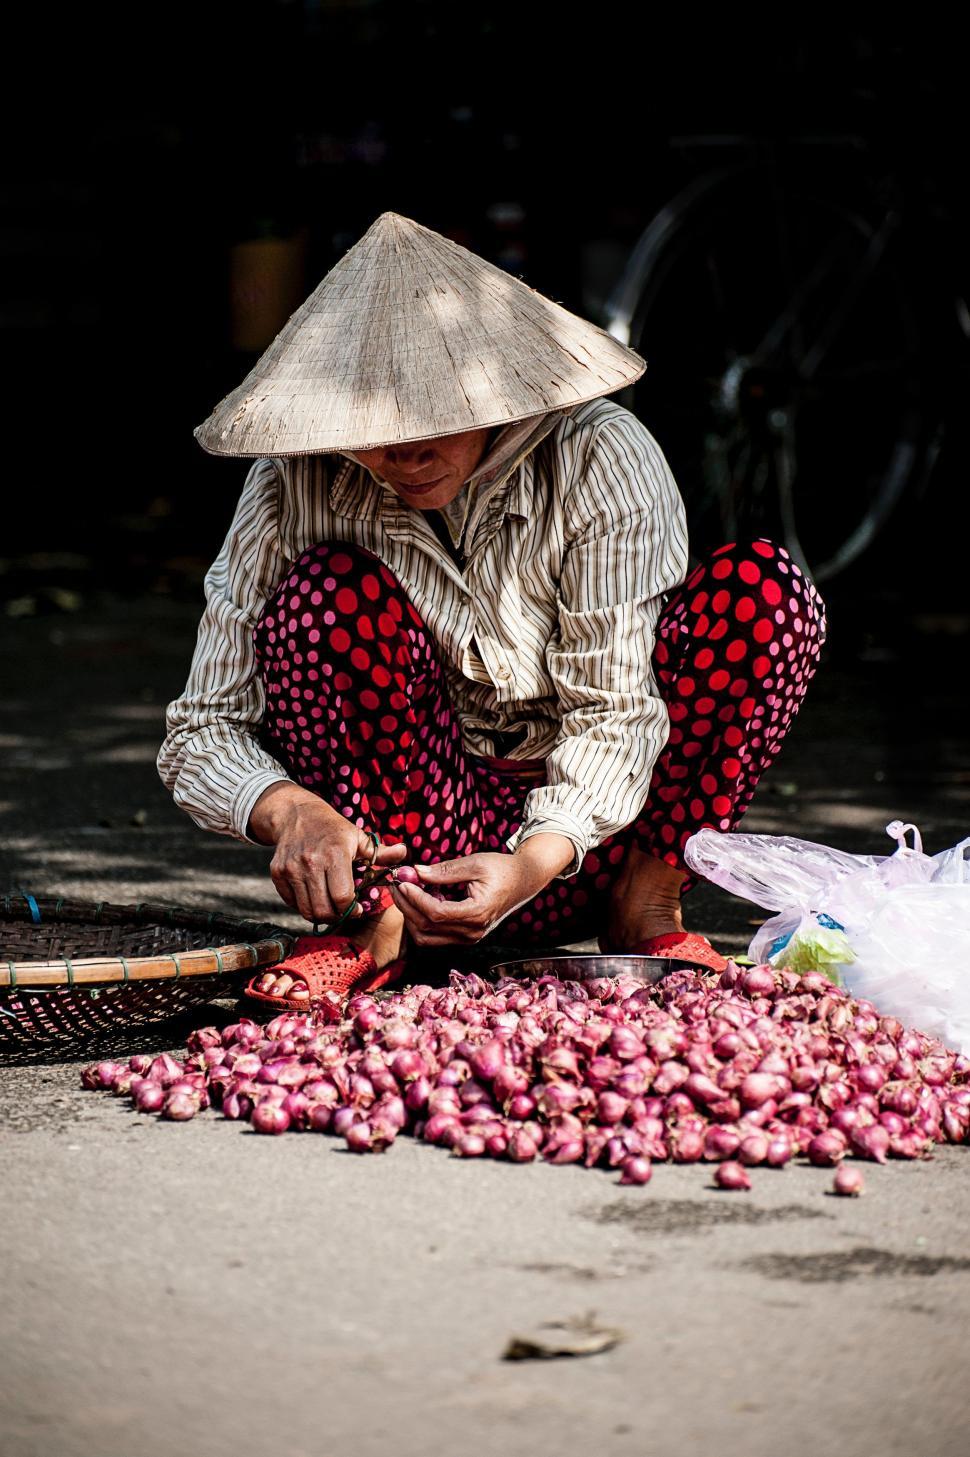 Free Image of Woman Sitting With a Bunch of Onions 